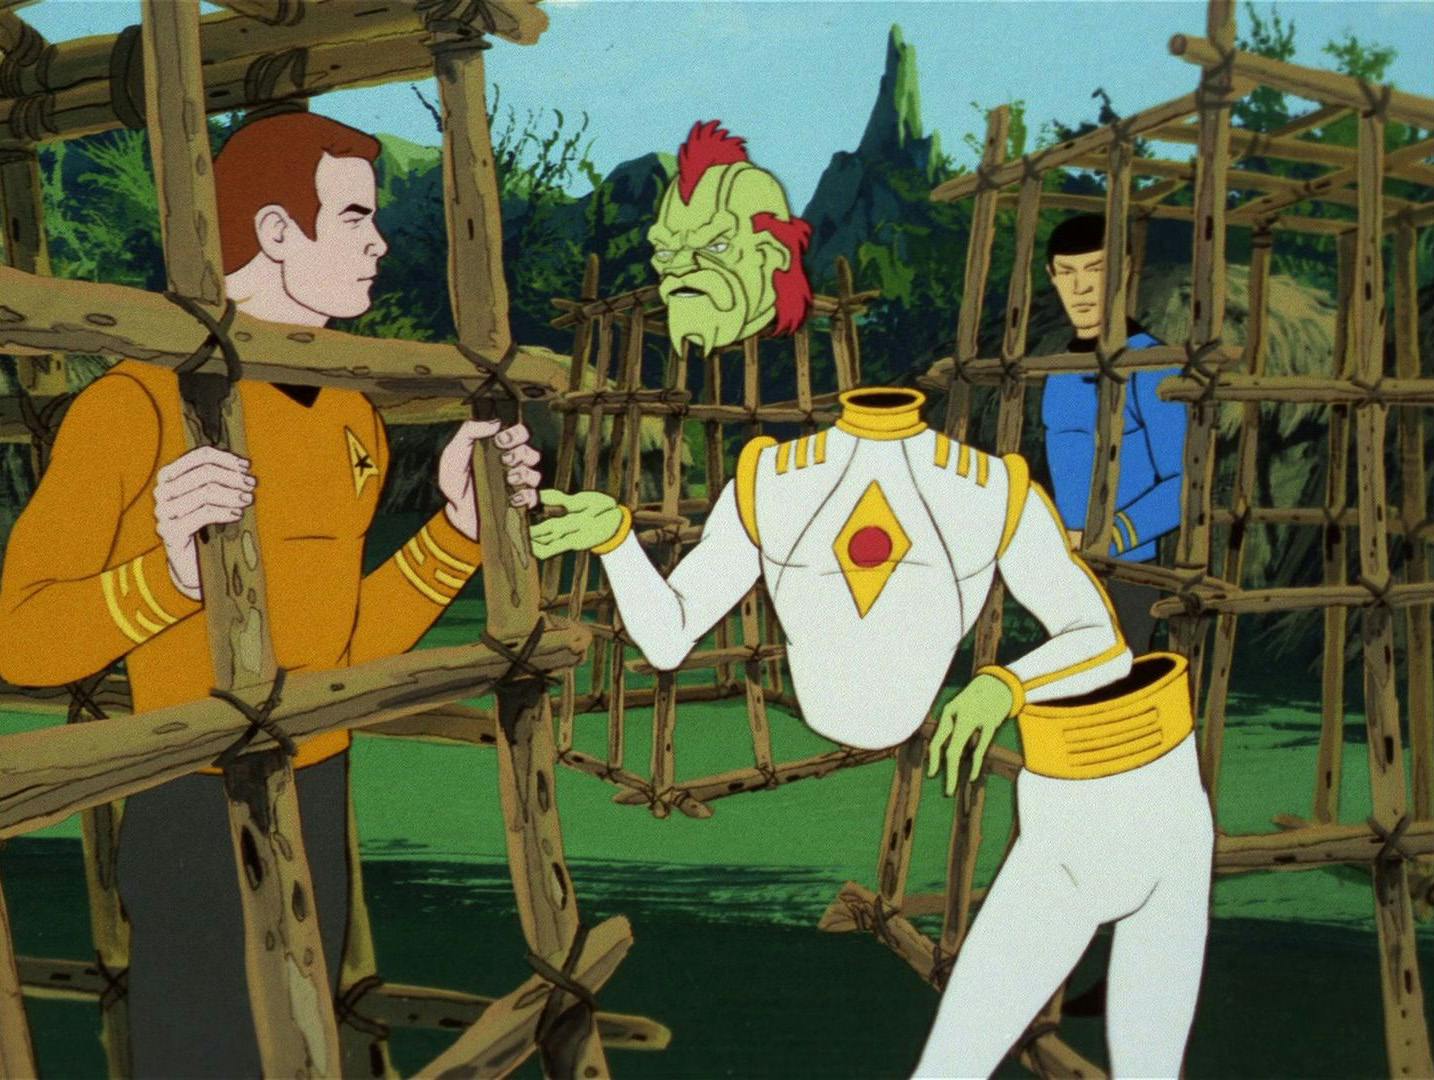 Bem separates into segments to escape his cage to talk with Kirk in his cage while Spock observes